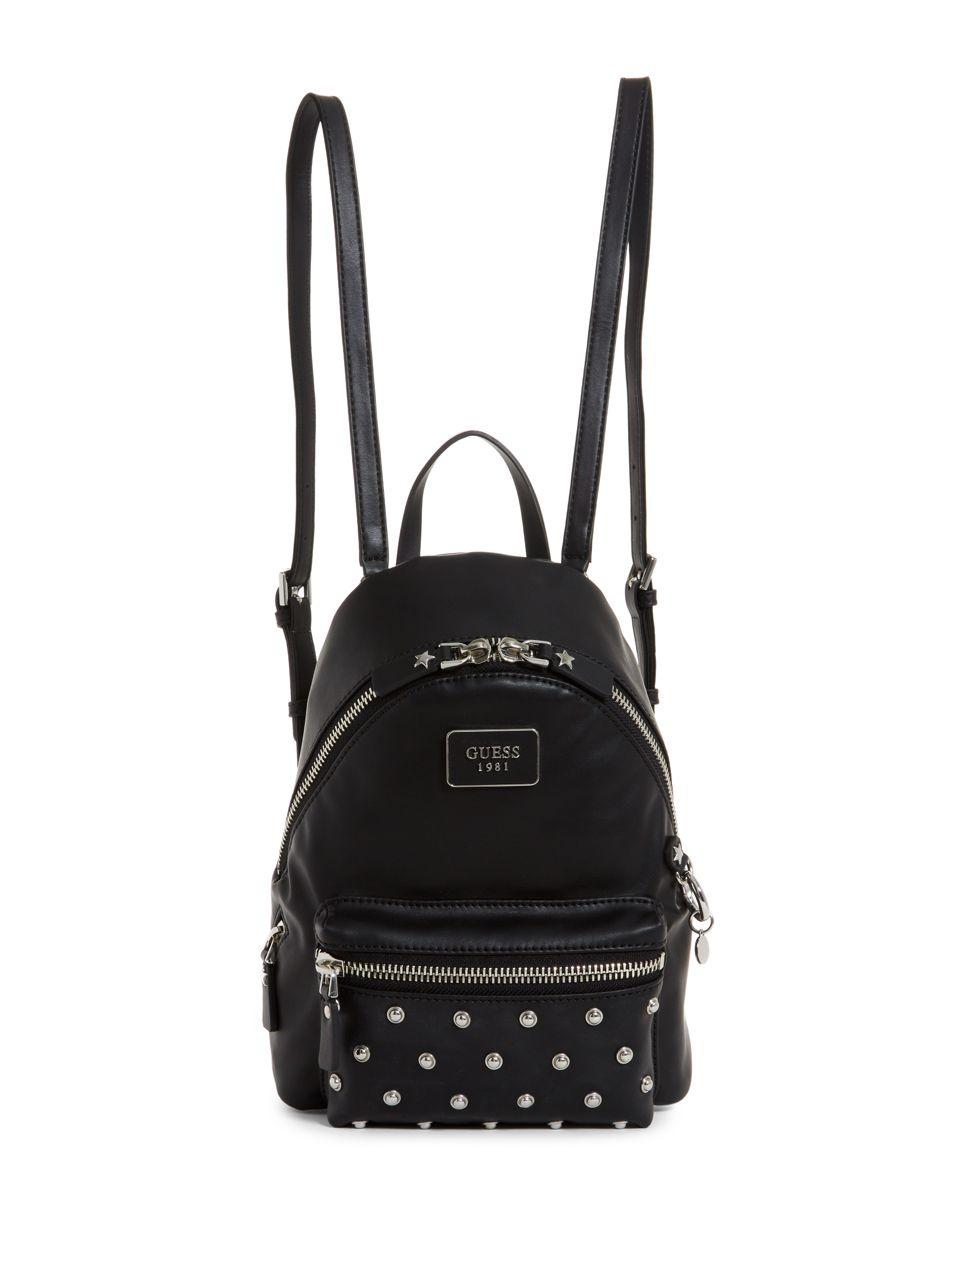 Lyst - Guess Cool School Small Leeza Backpack in Black